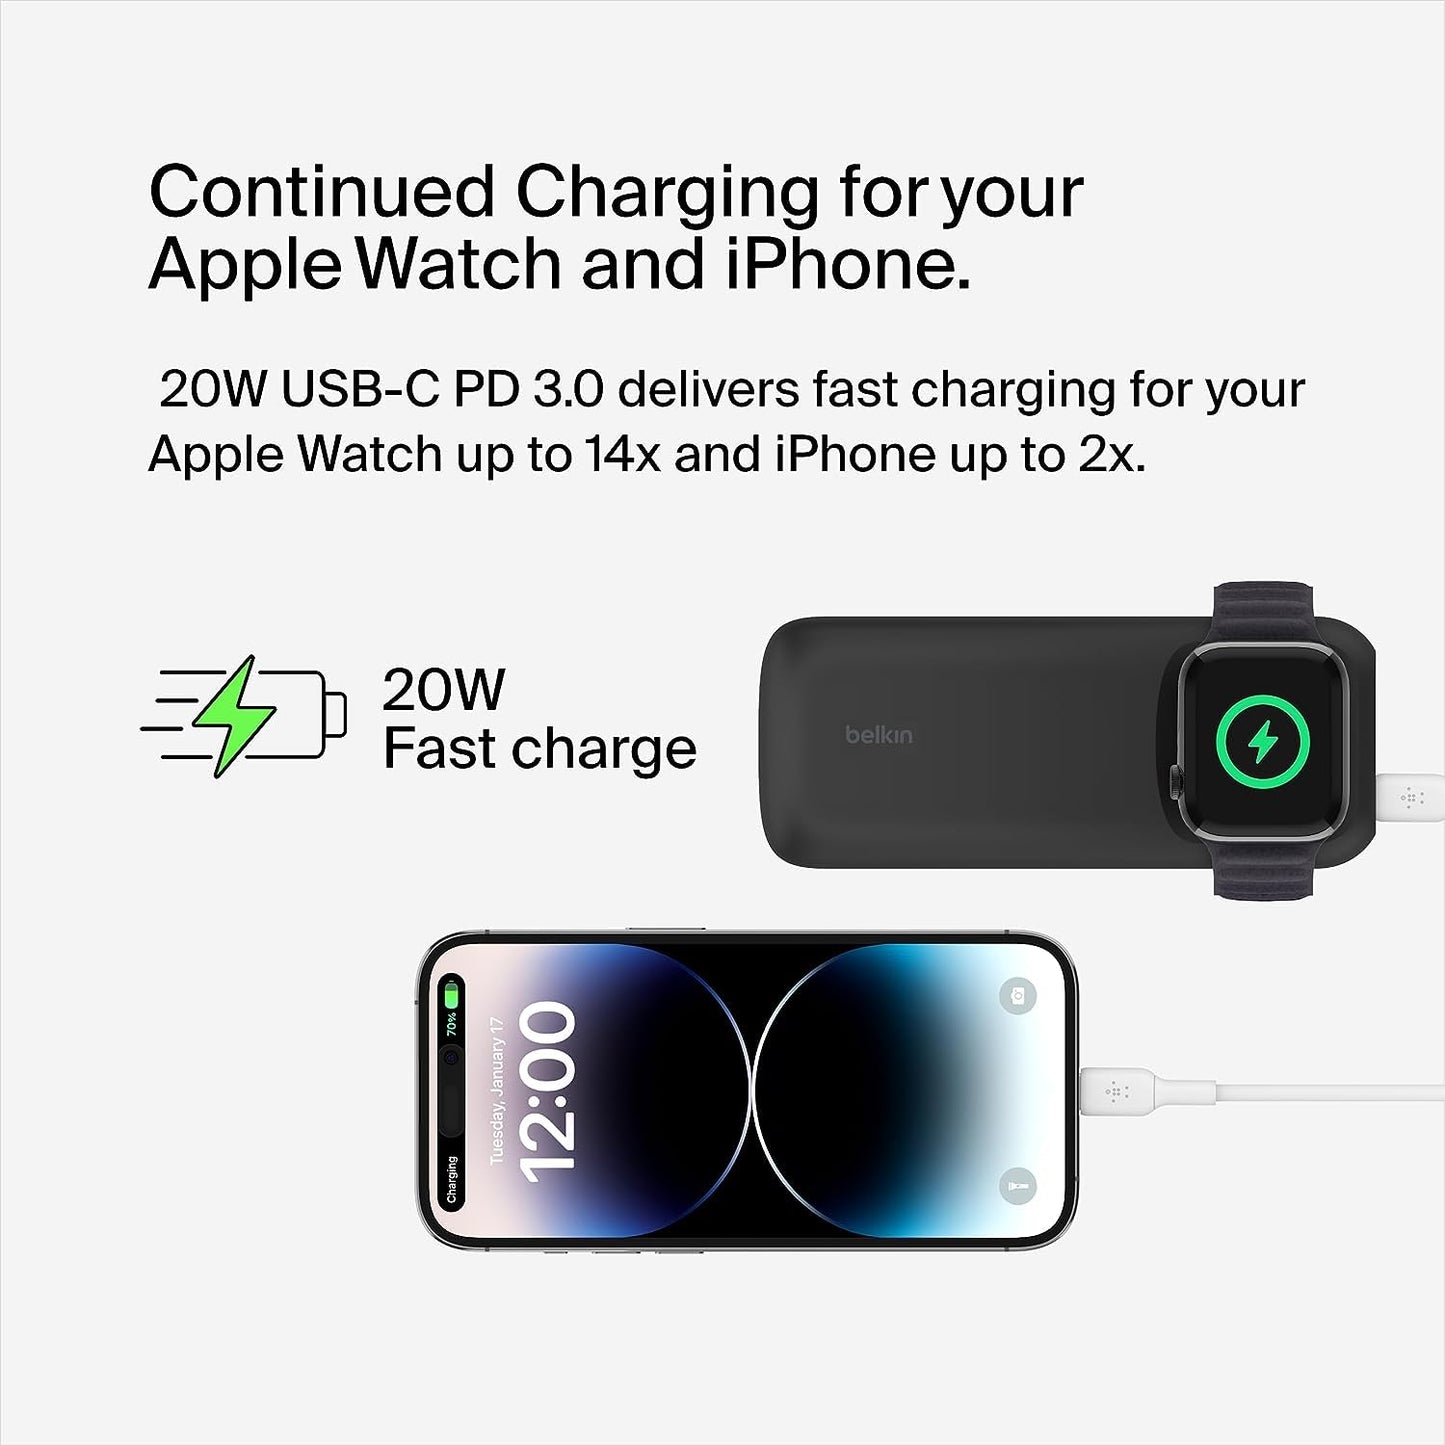 Belkin 10000 mAh Power Bank with 7.5W Fast Wireless Apple Watch & AirPods Pro (2nd Generation) Charger, 20W USB-C PD Port - Black